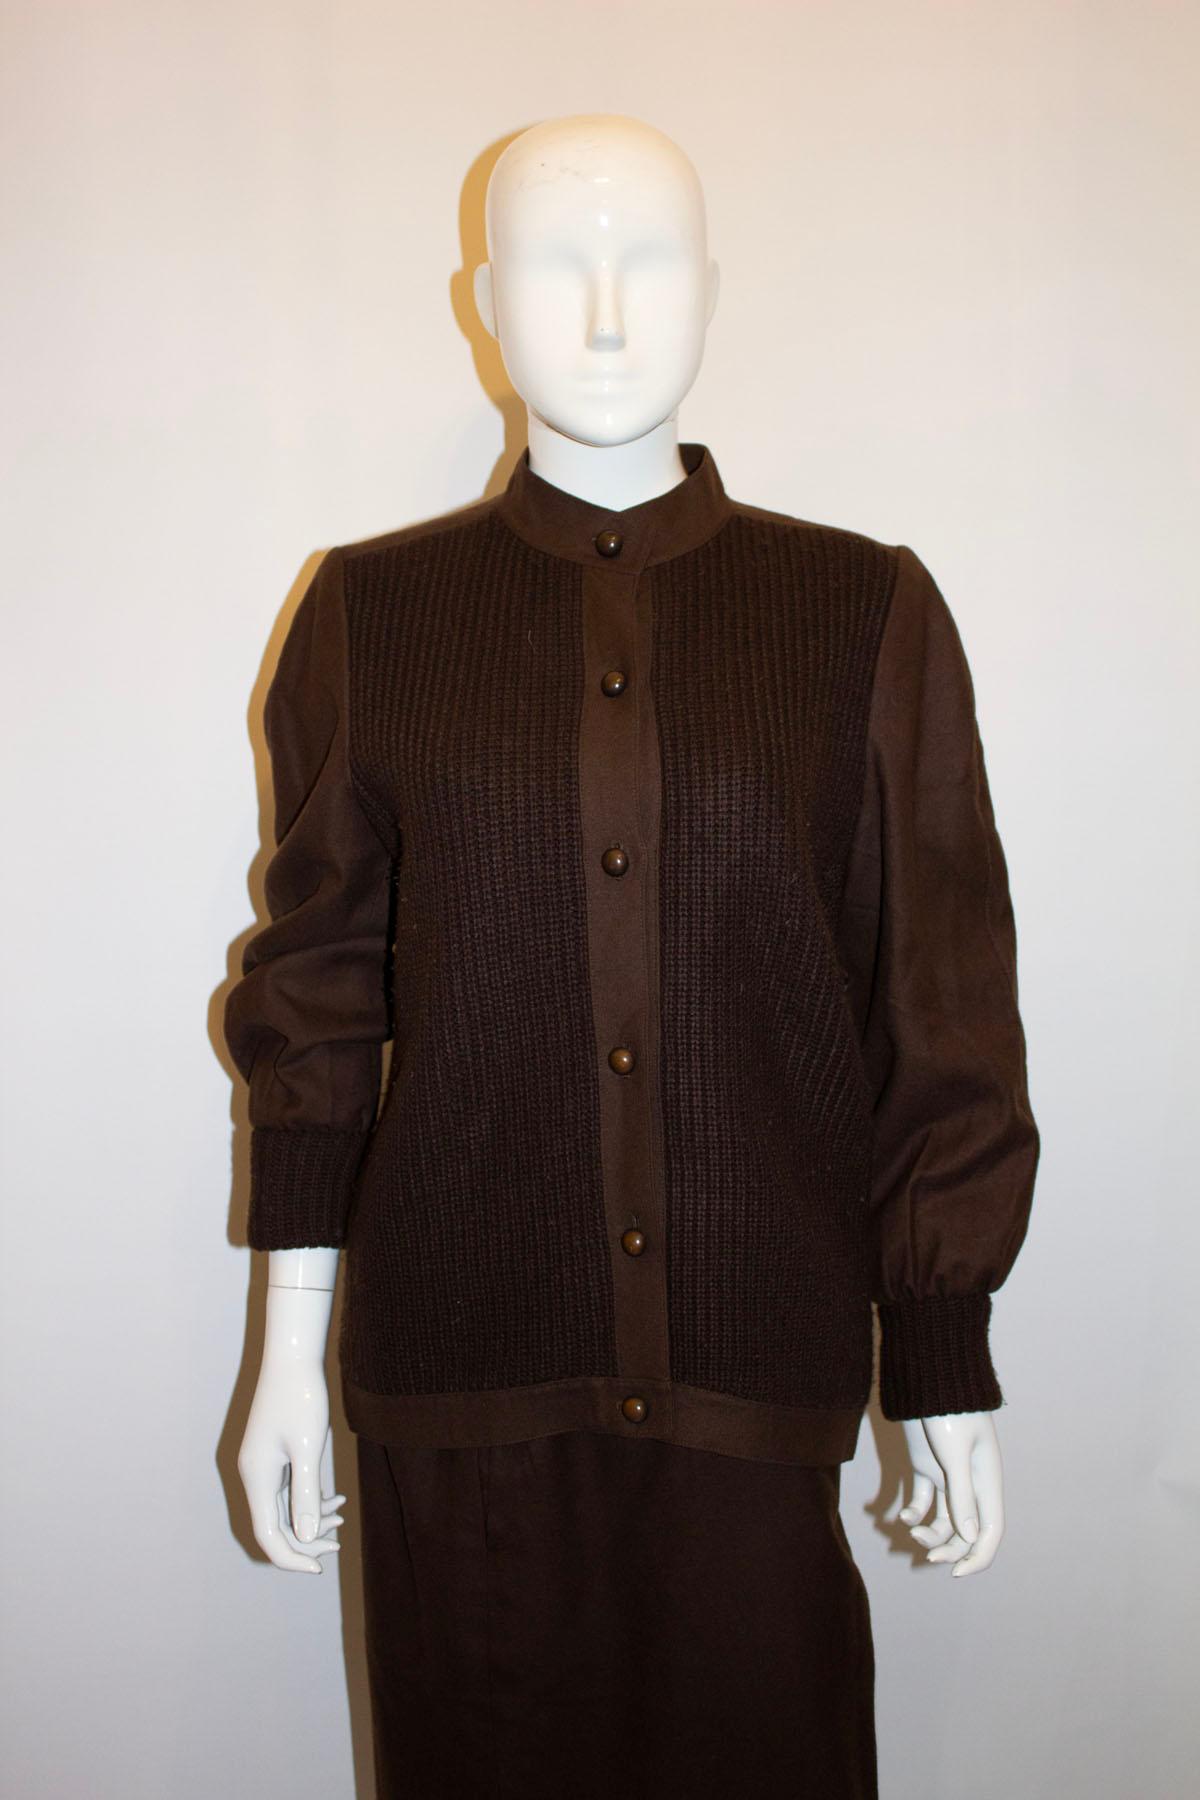 Women's Vintage Christian Dior London Jacket and Skirt For Sale